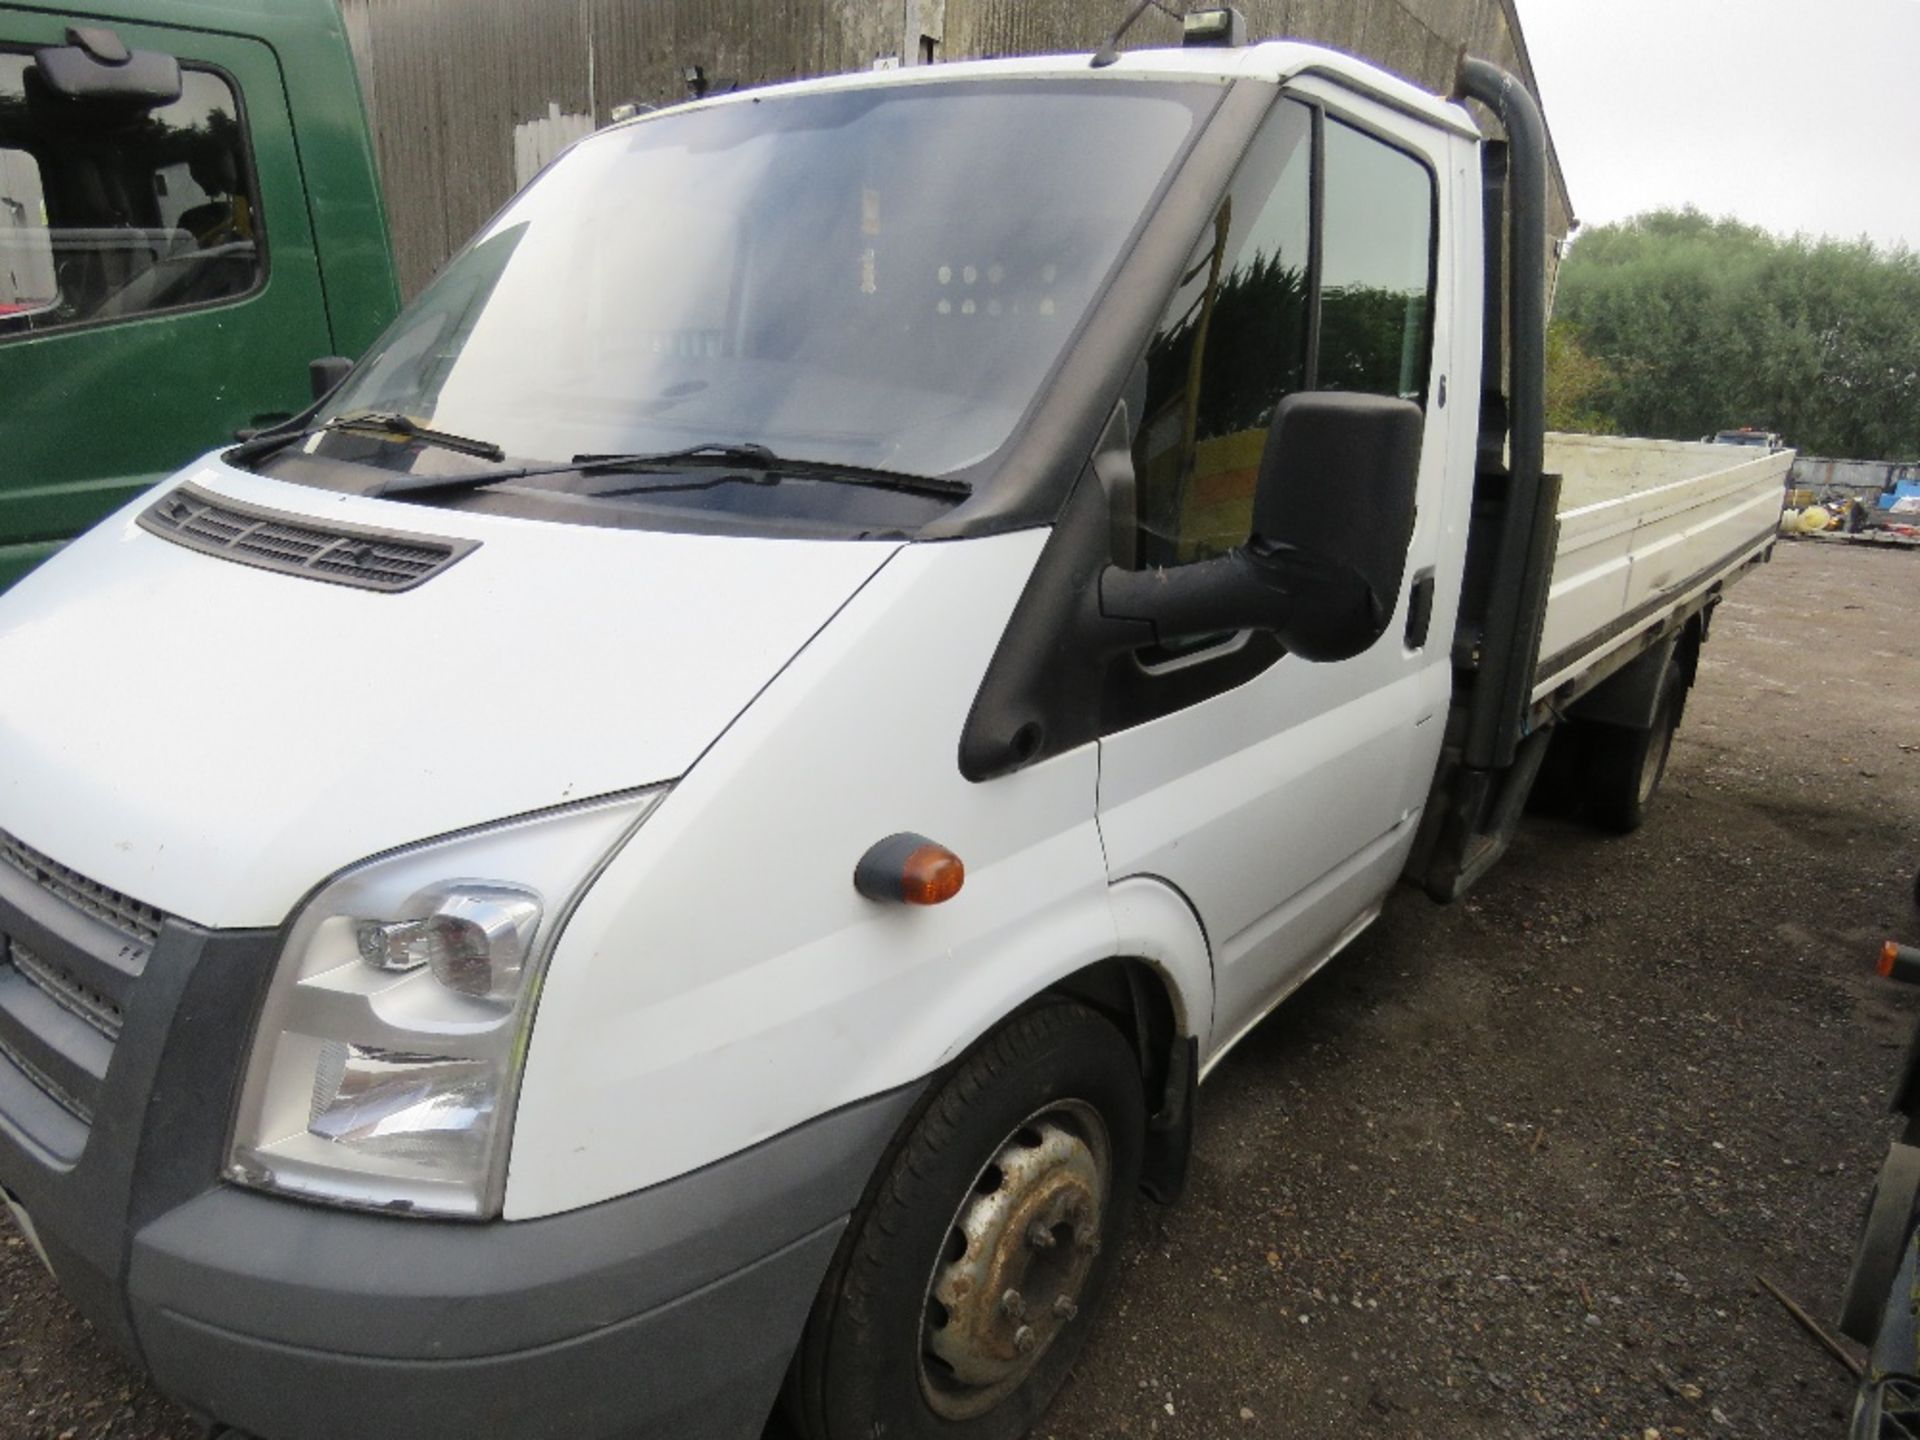 FORD TRANSIT DROPSIDE PICKUP REG:YT13 MMK. TWIN WHEELED. 12FT LENGTH DROPSIDE BODY APPROX. 175,042 R - Image 8 of 8